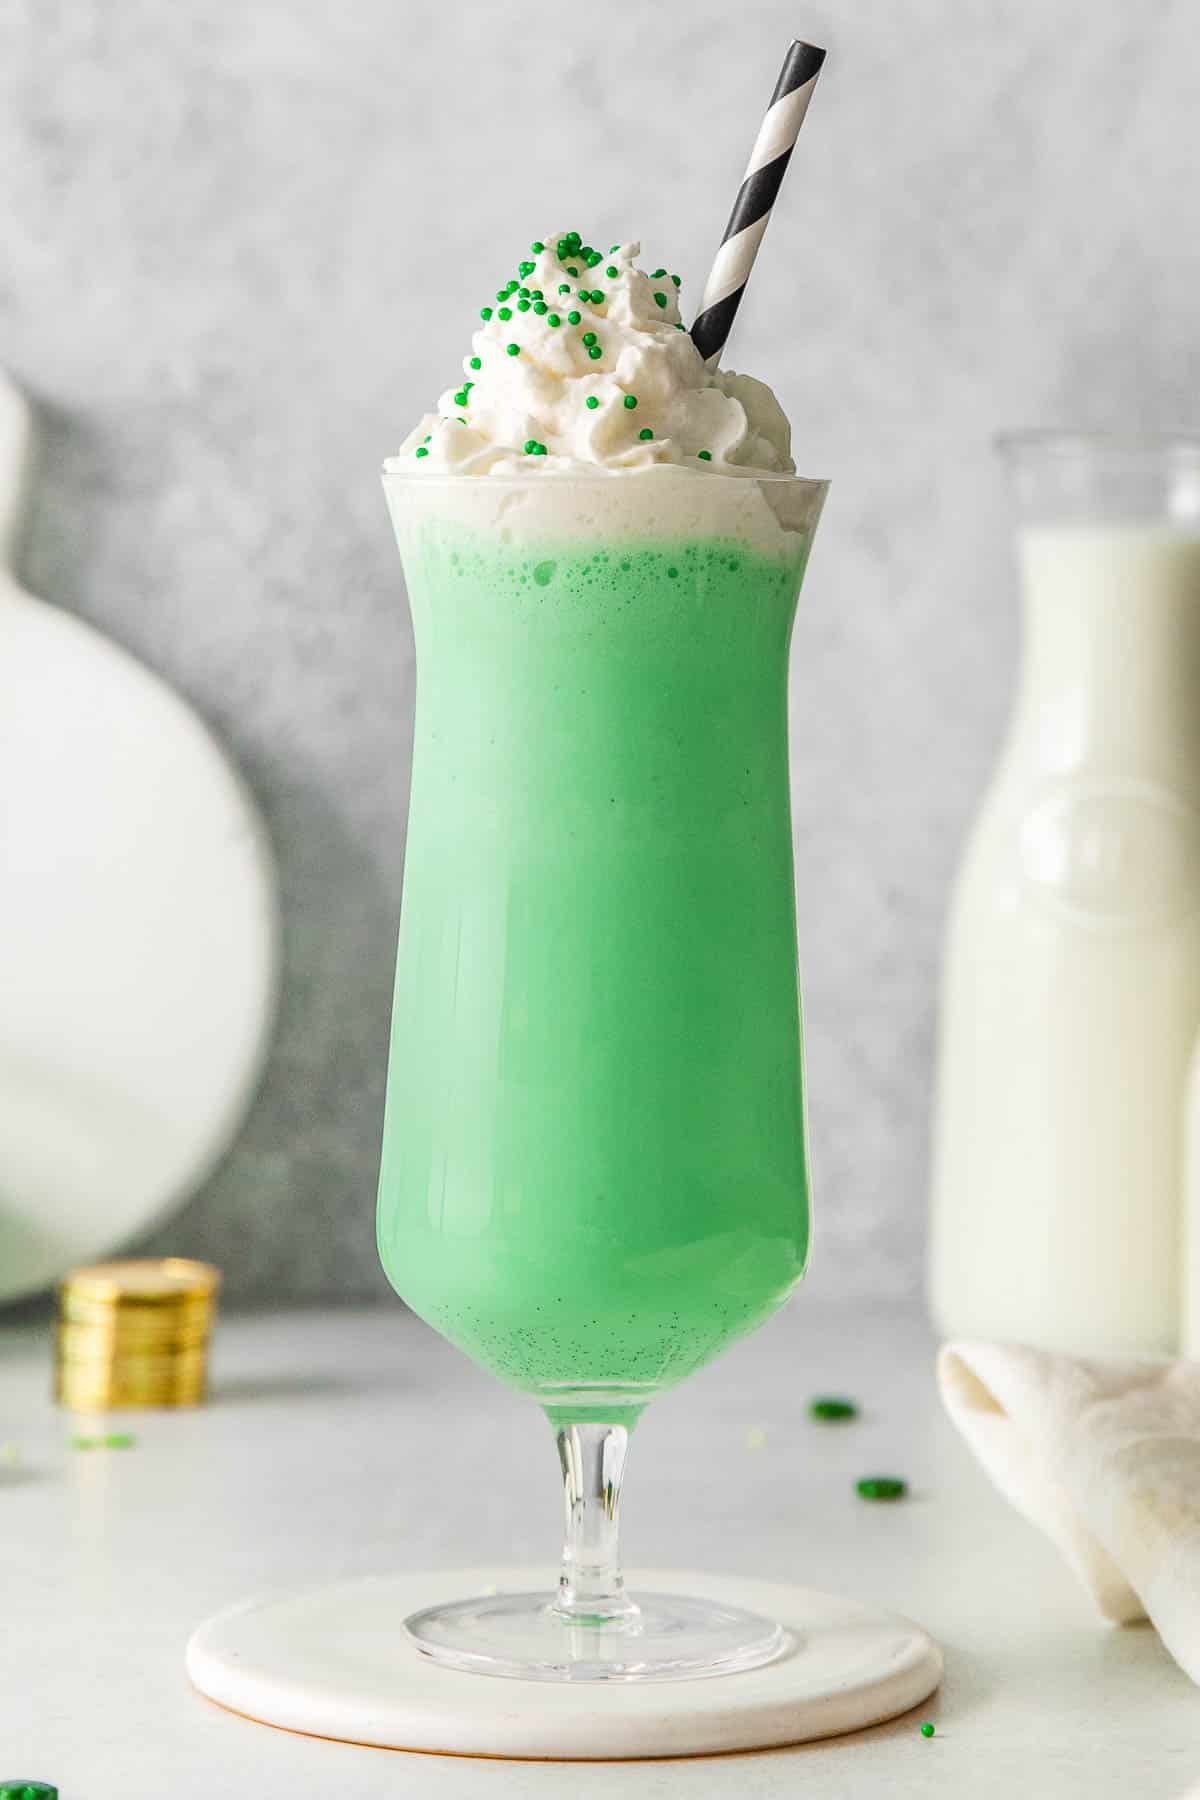 tall glass of green milkshake topped with whipped cream and green sprinkles.